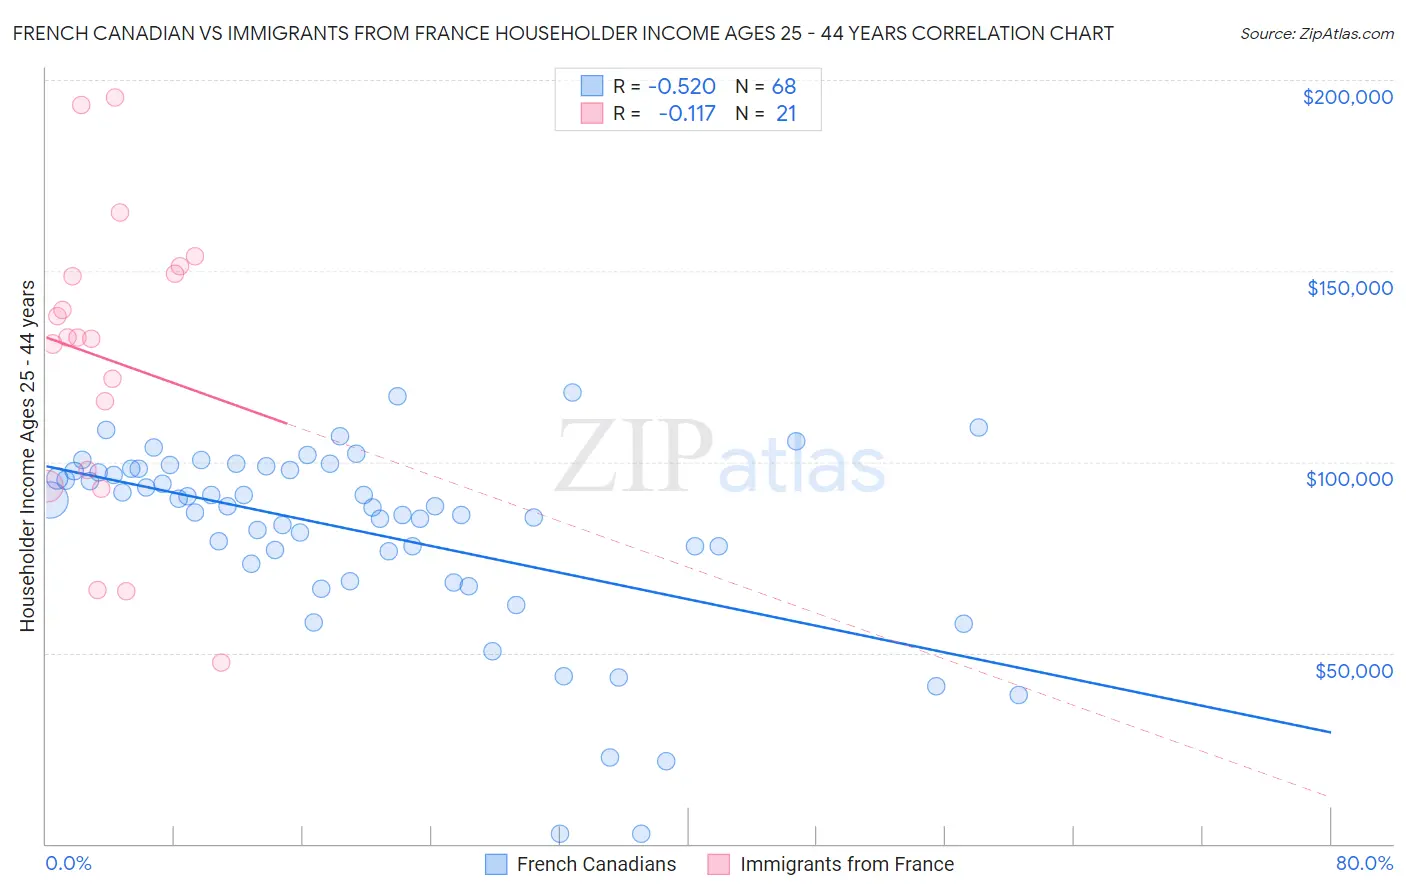 French Canadian vs Immigrants from France Householder Income Ages 25 - 44 years